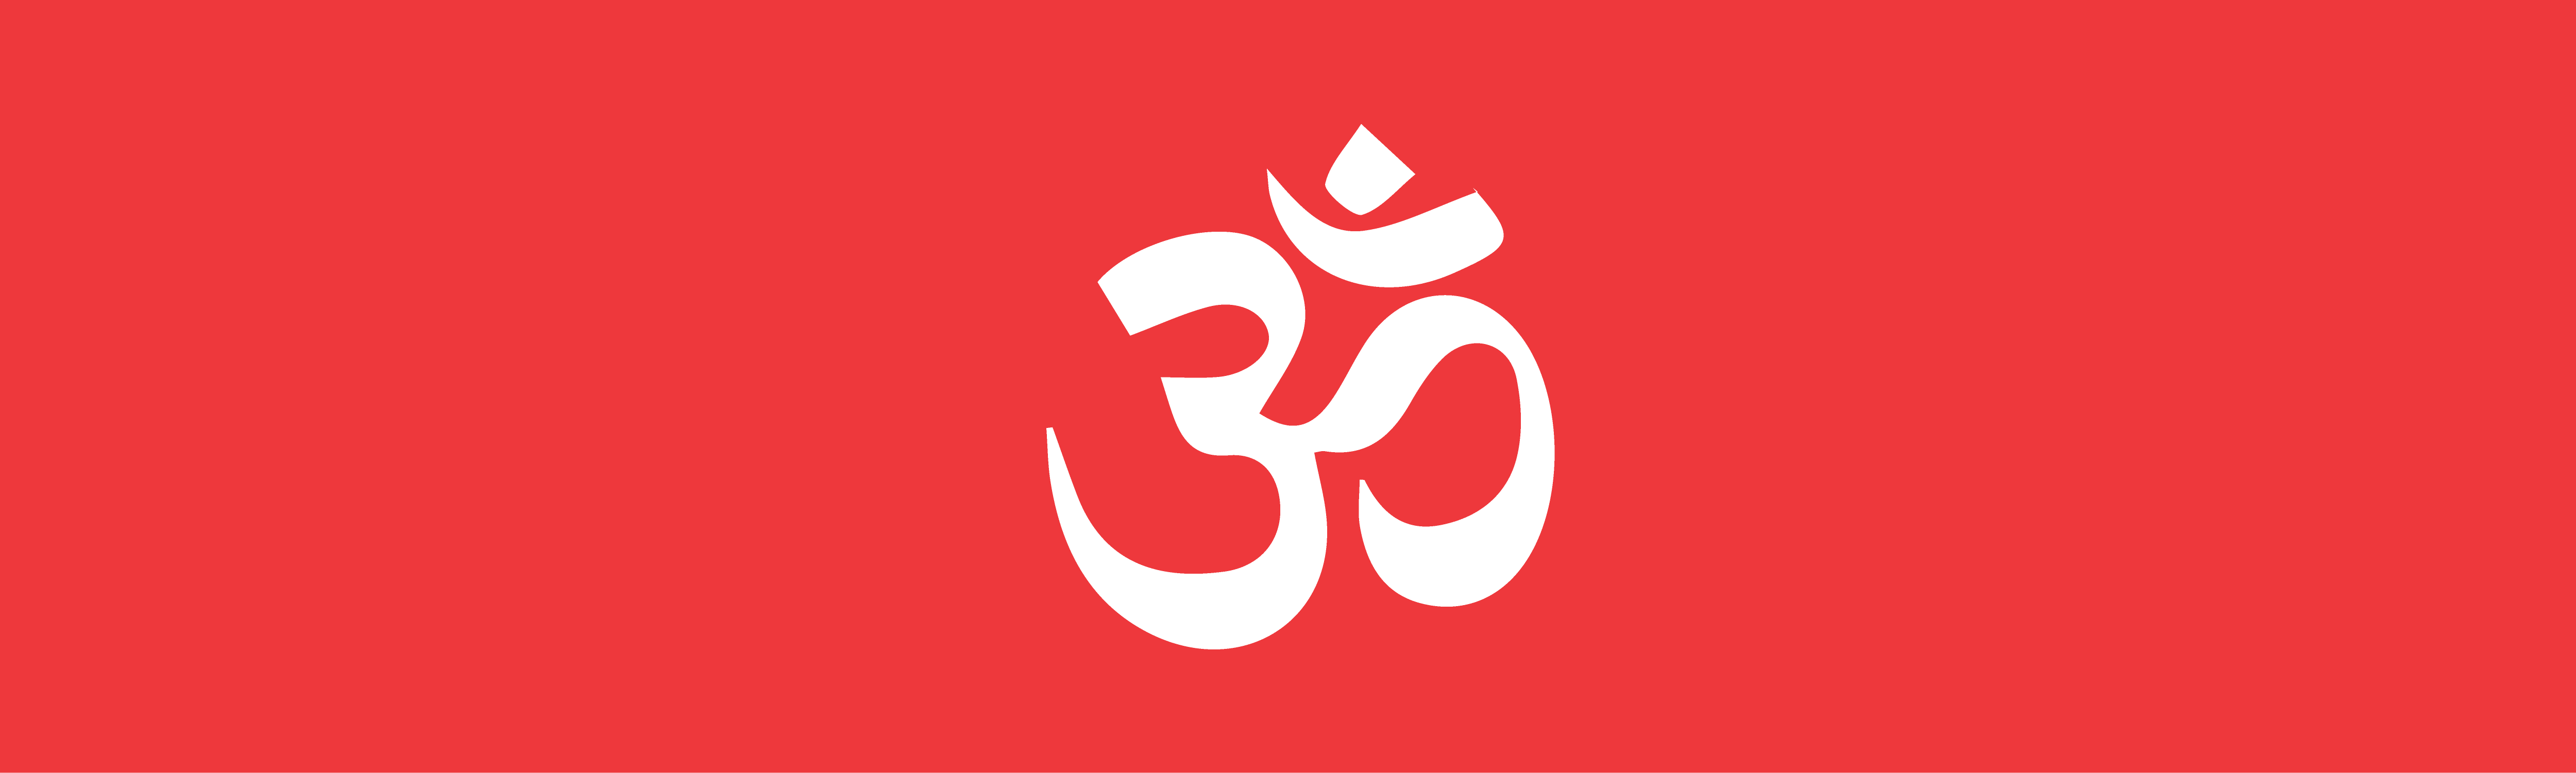 social issues in hinduism